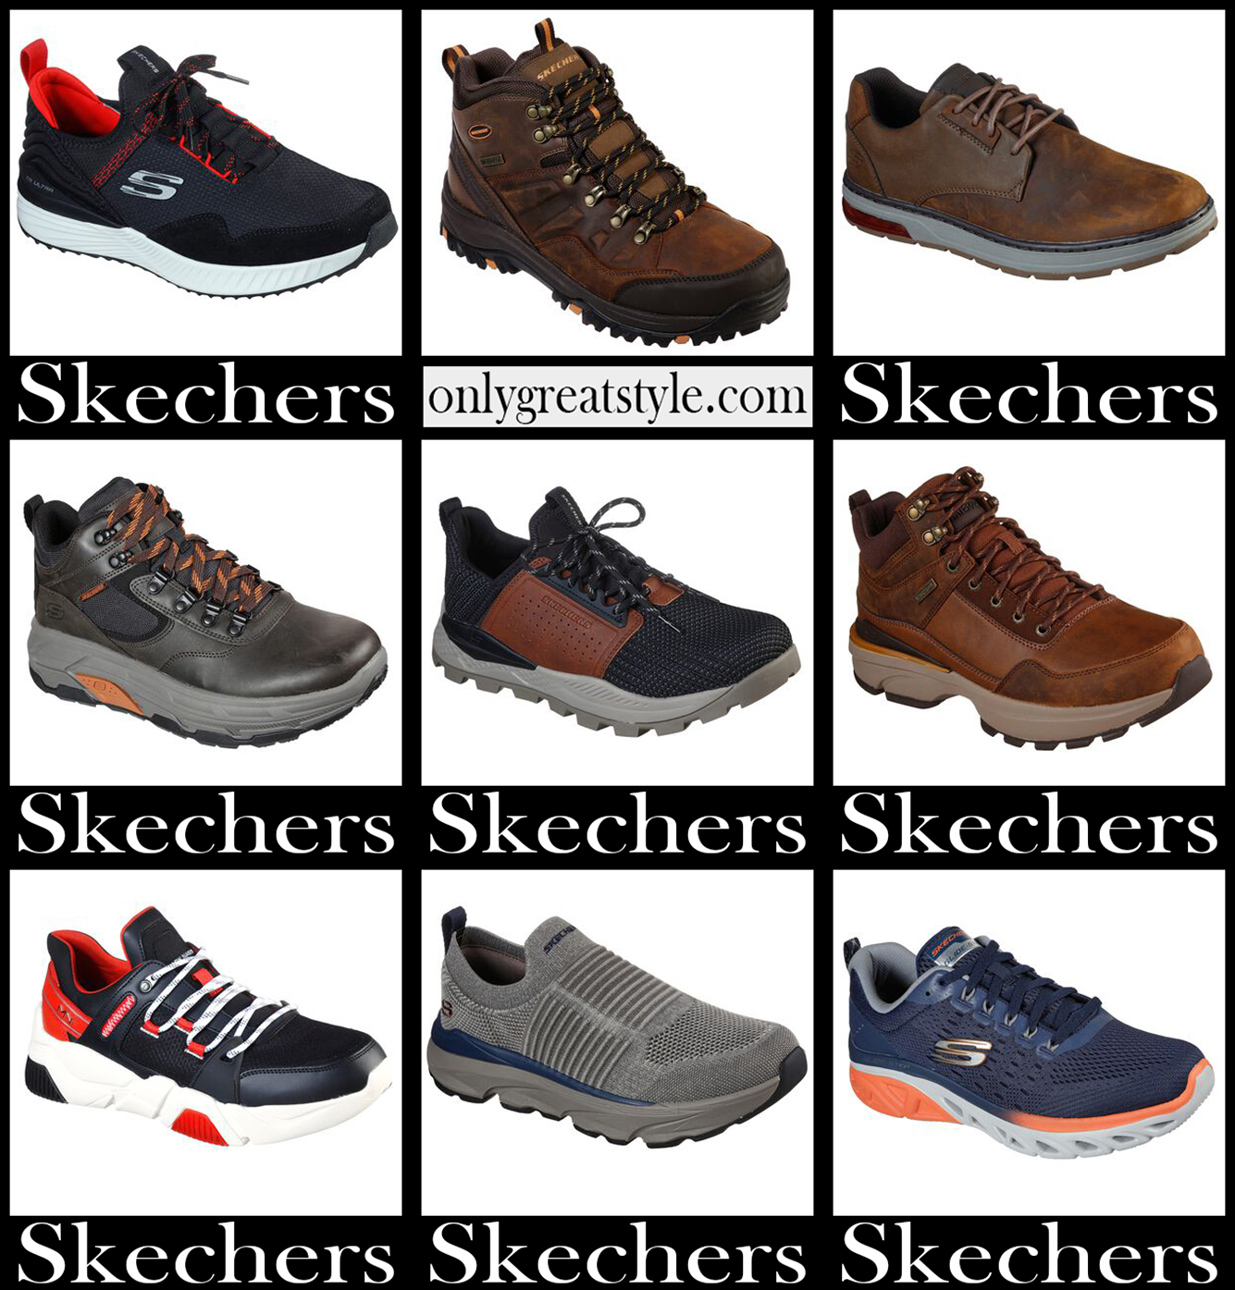 the new skechers shoes